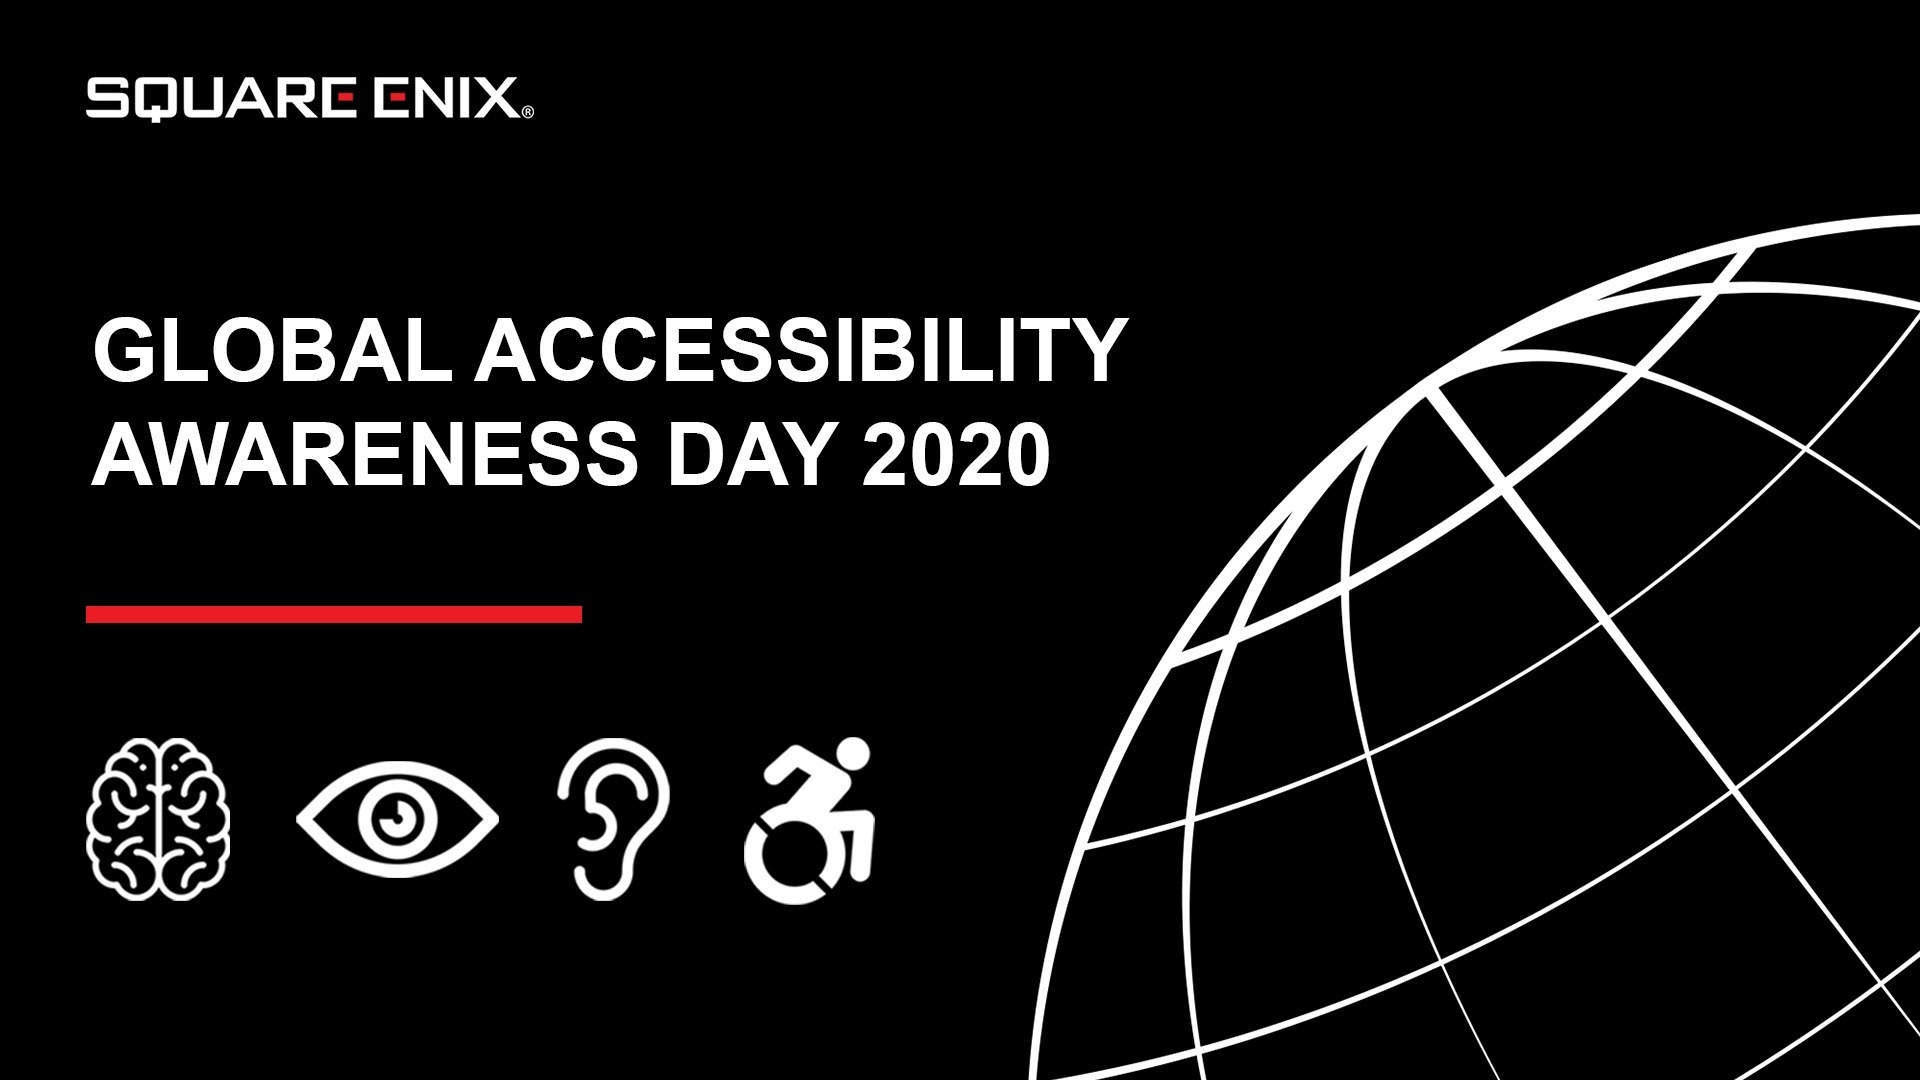 Image - Global Accessibility Awareness Day 2020